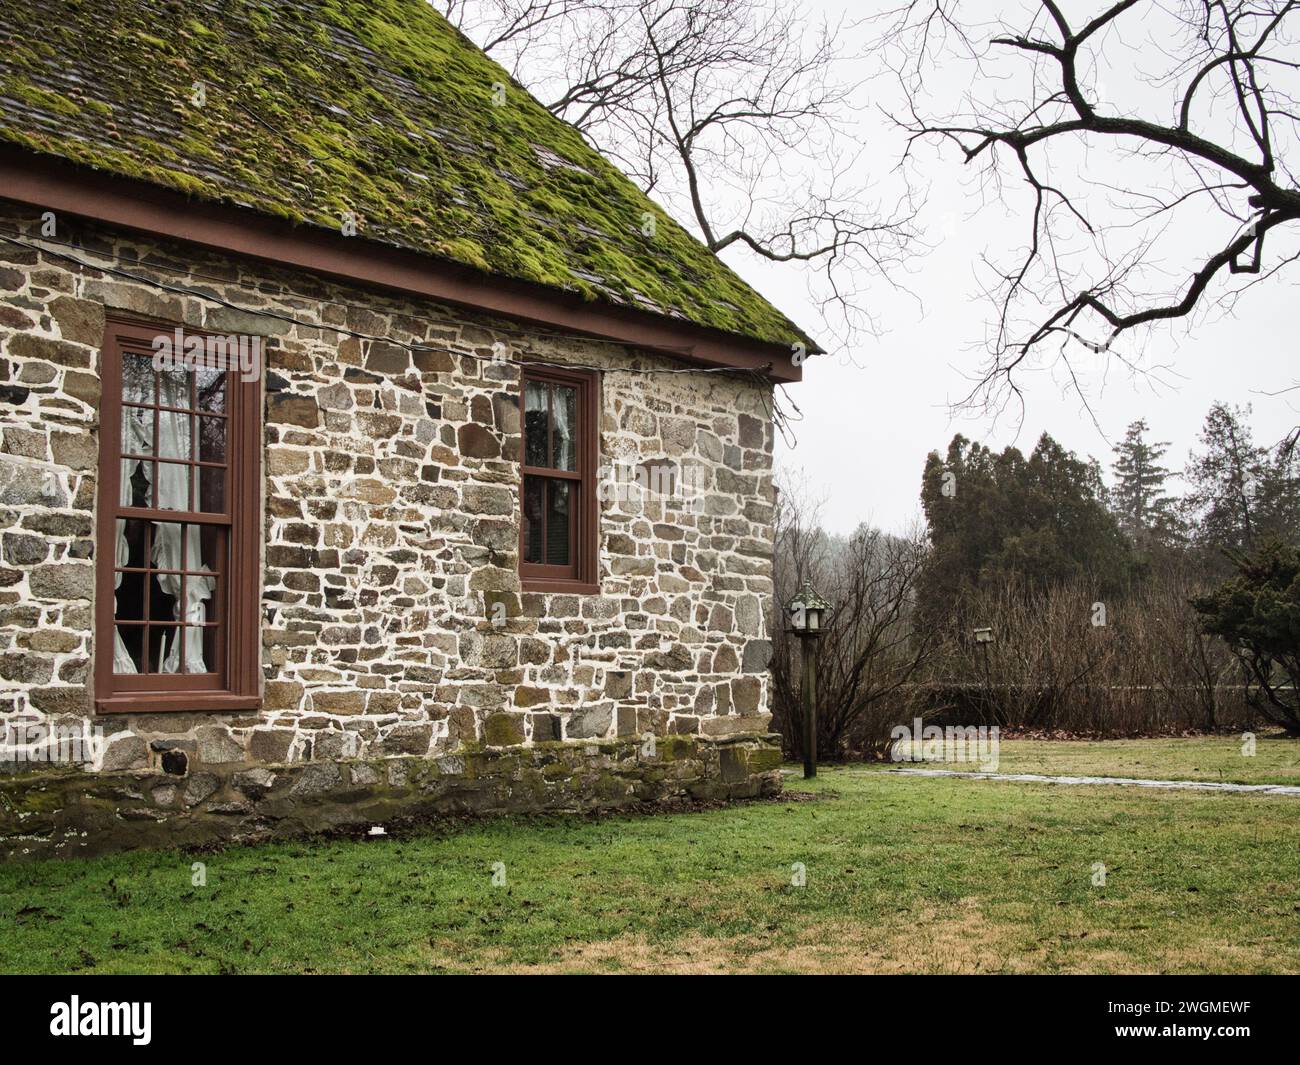 Old stone house with mossy roof and gnarled tree branch in historic Virginia town. Stock Photo